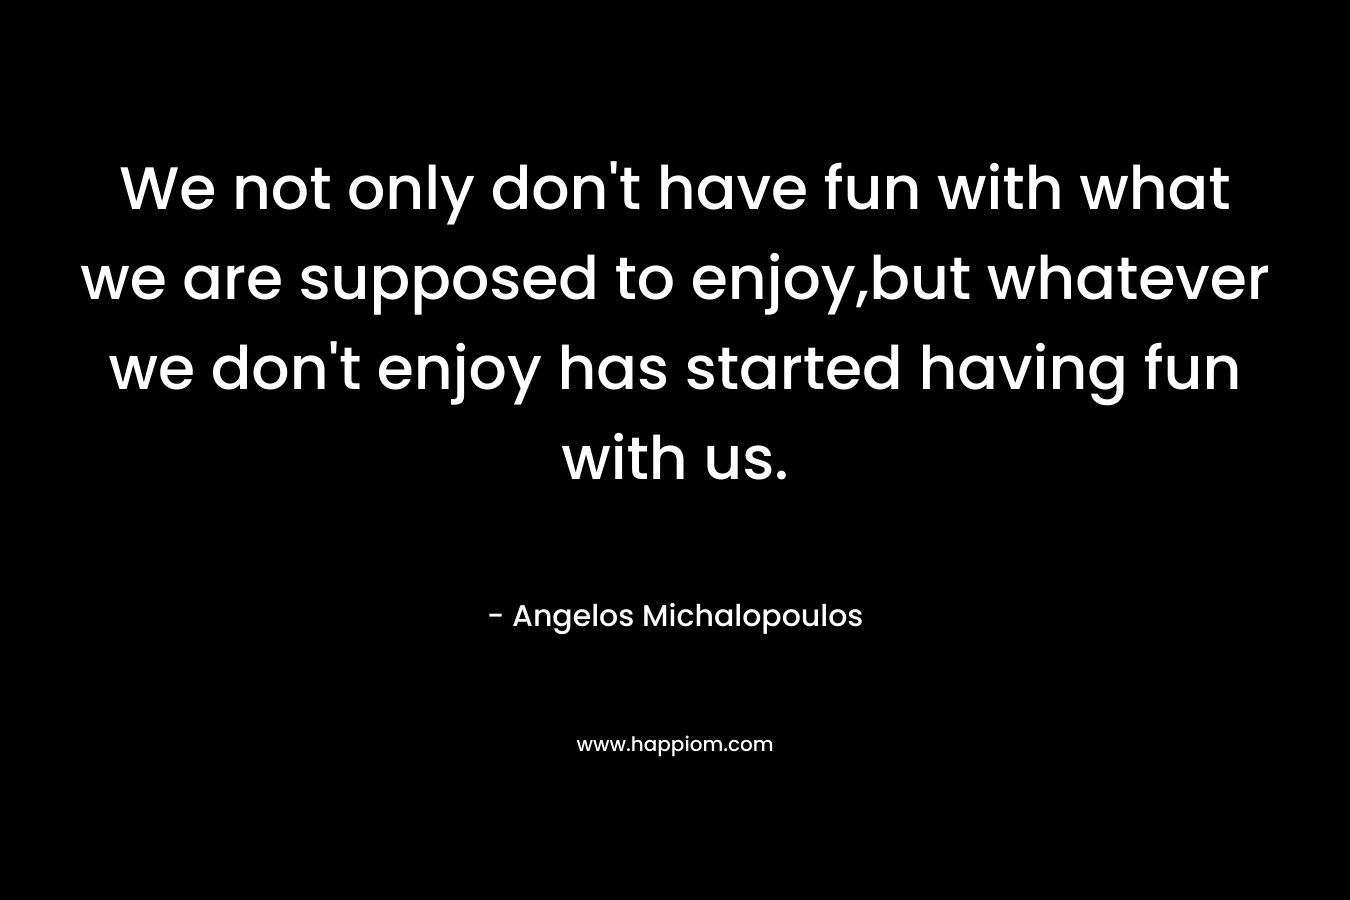 We not only don't have fun with what we are supposed to enjoy,but whatever we don't enjoy has started having fun with us.